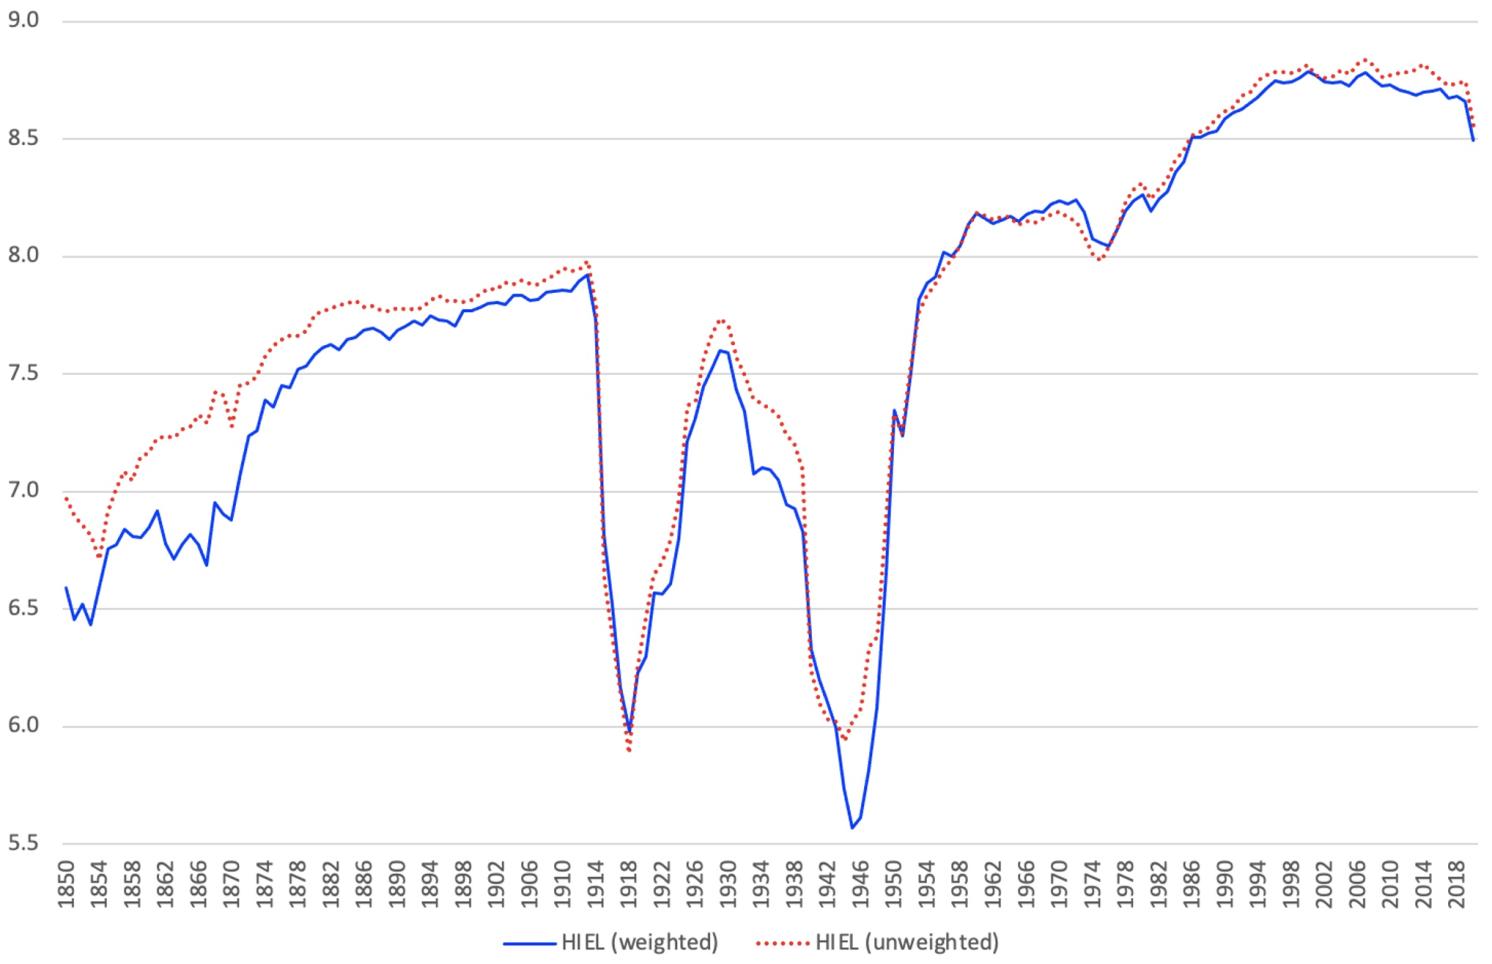 Figure 1 Historical Index of Economic Liberty: Unweighted and weighted average